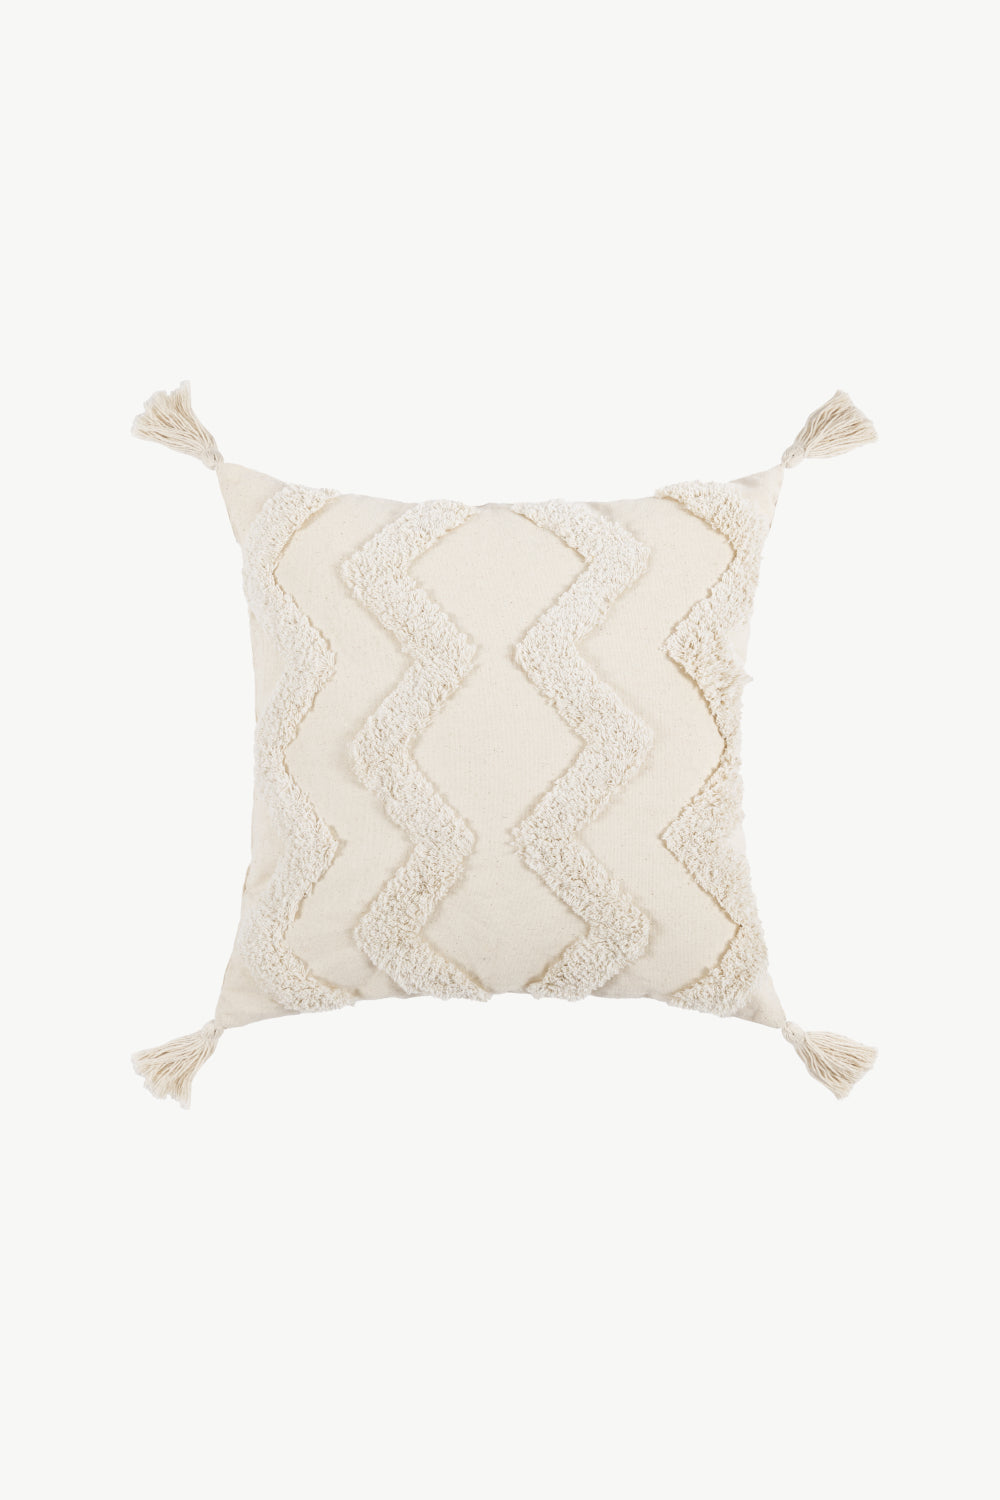 8 Styles Decorative Fringe Pillow Cover